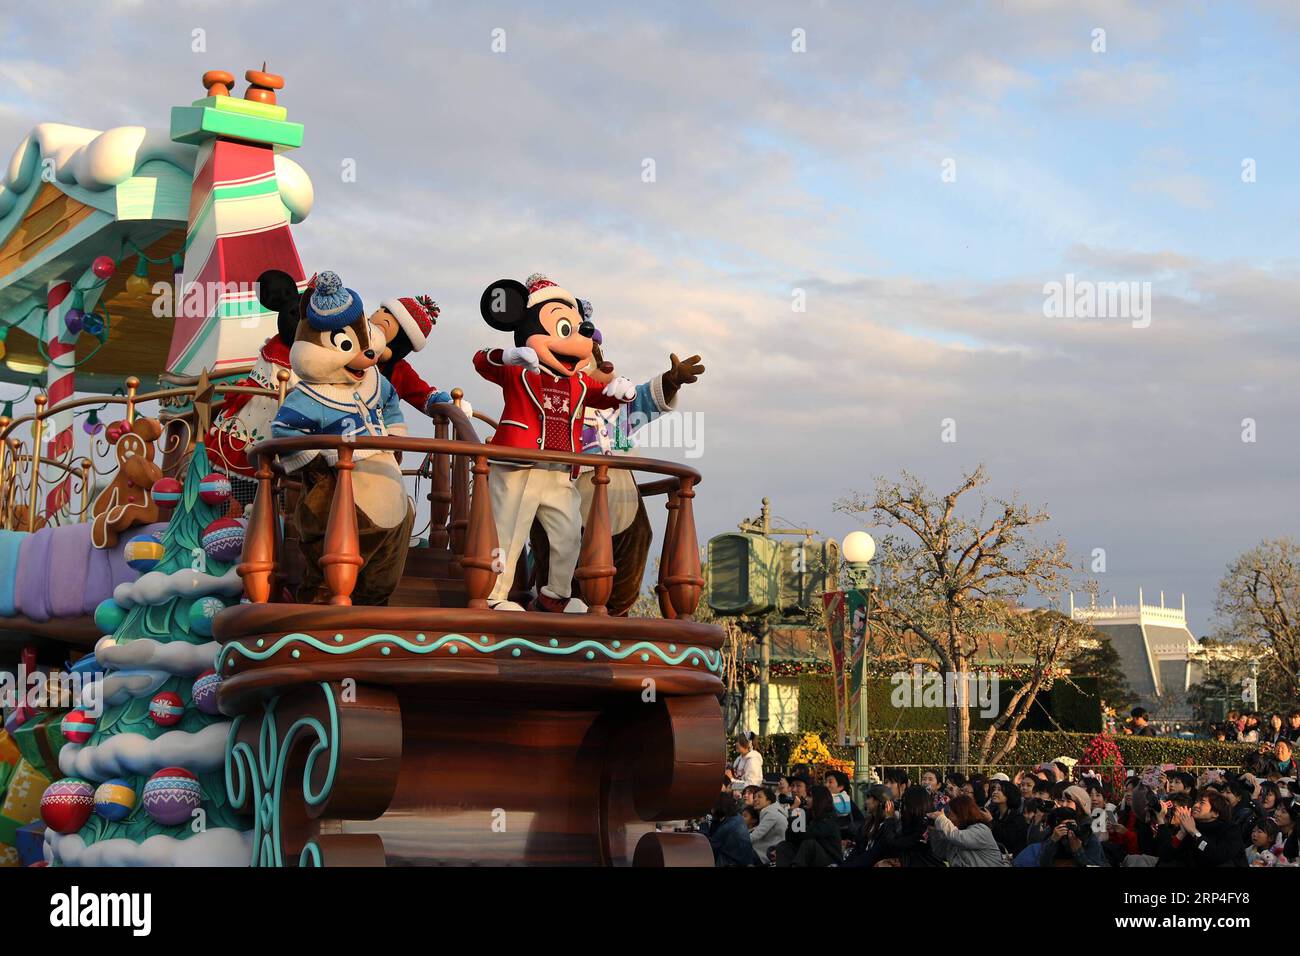 (181107) -- CHIBA, Nov. 7, 2018 -- Disney characters wave to guests on a float during the Christmas parade at Tokyo Disneyland in Chiba, Japan, on Nov. 7, 2018. ) (psw) JAPAN-CHIBA-DISNEY-CHRISTMAS PARADE DuxXiaoyi PUBLICATIONxNOTxINxCHN Stock Photo